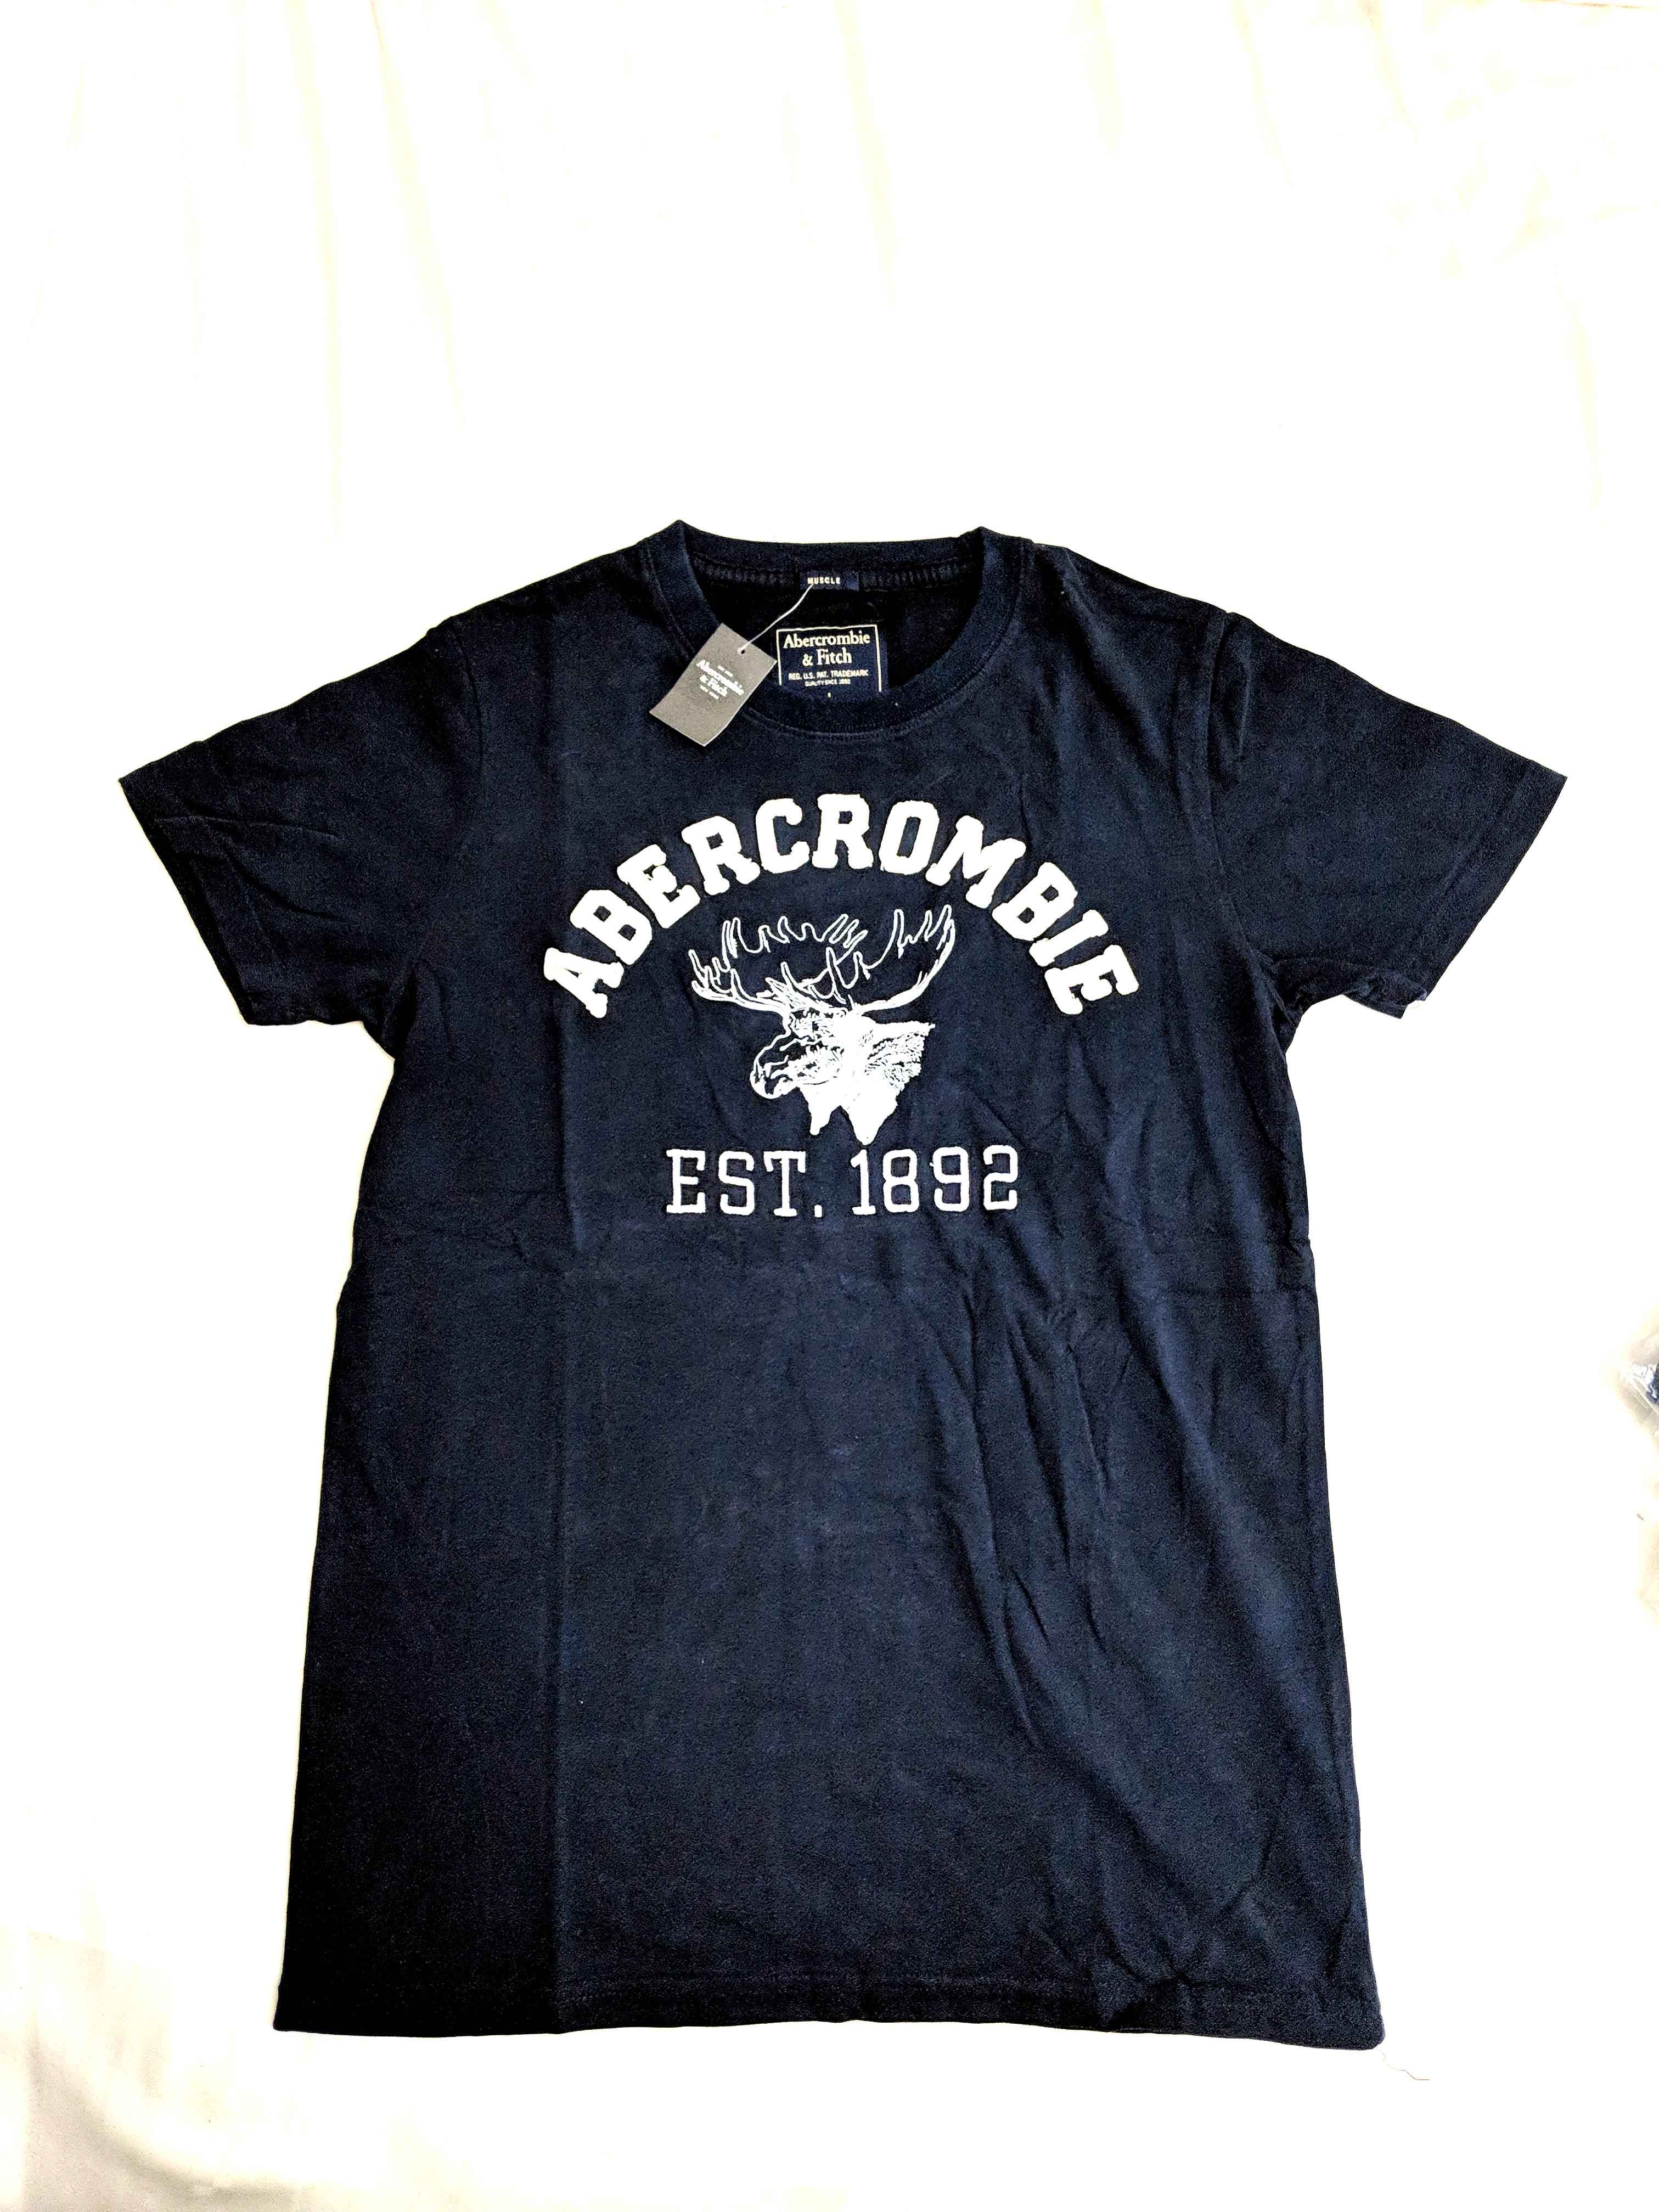 abercrombie and fitch mens clearance